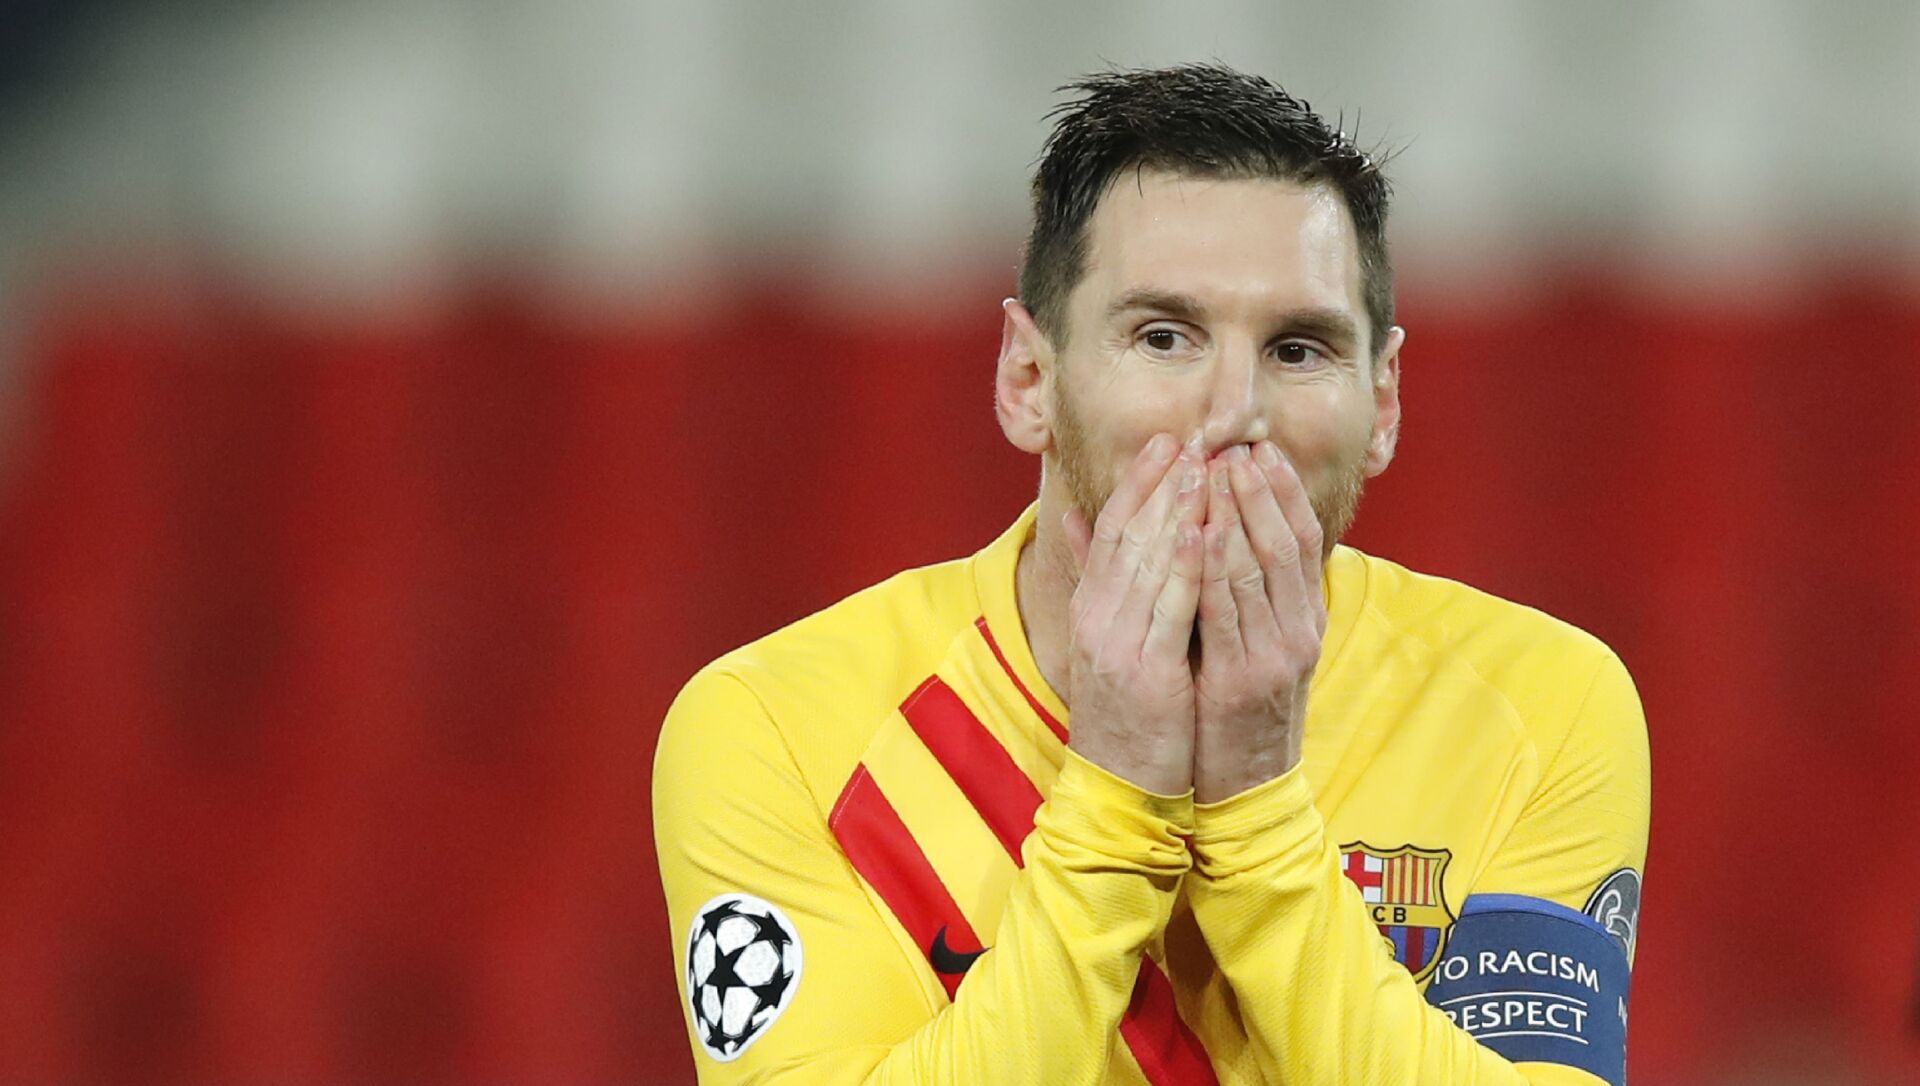 Barcelona's Lionel Messi reacts after a missed a penalty shot during the Champions League, round of 16, second leg soccer match between Paris Saint-Germain and FC Barcelona at the Parc des Princes stadium in Paris on Wednesday, March 10, 2021 - اسپوتنیک افغانستان  , 1920, 05.08.2021